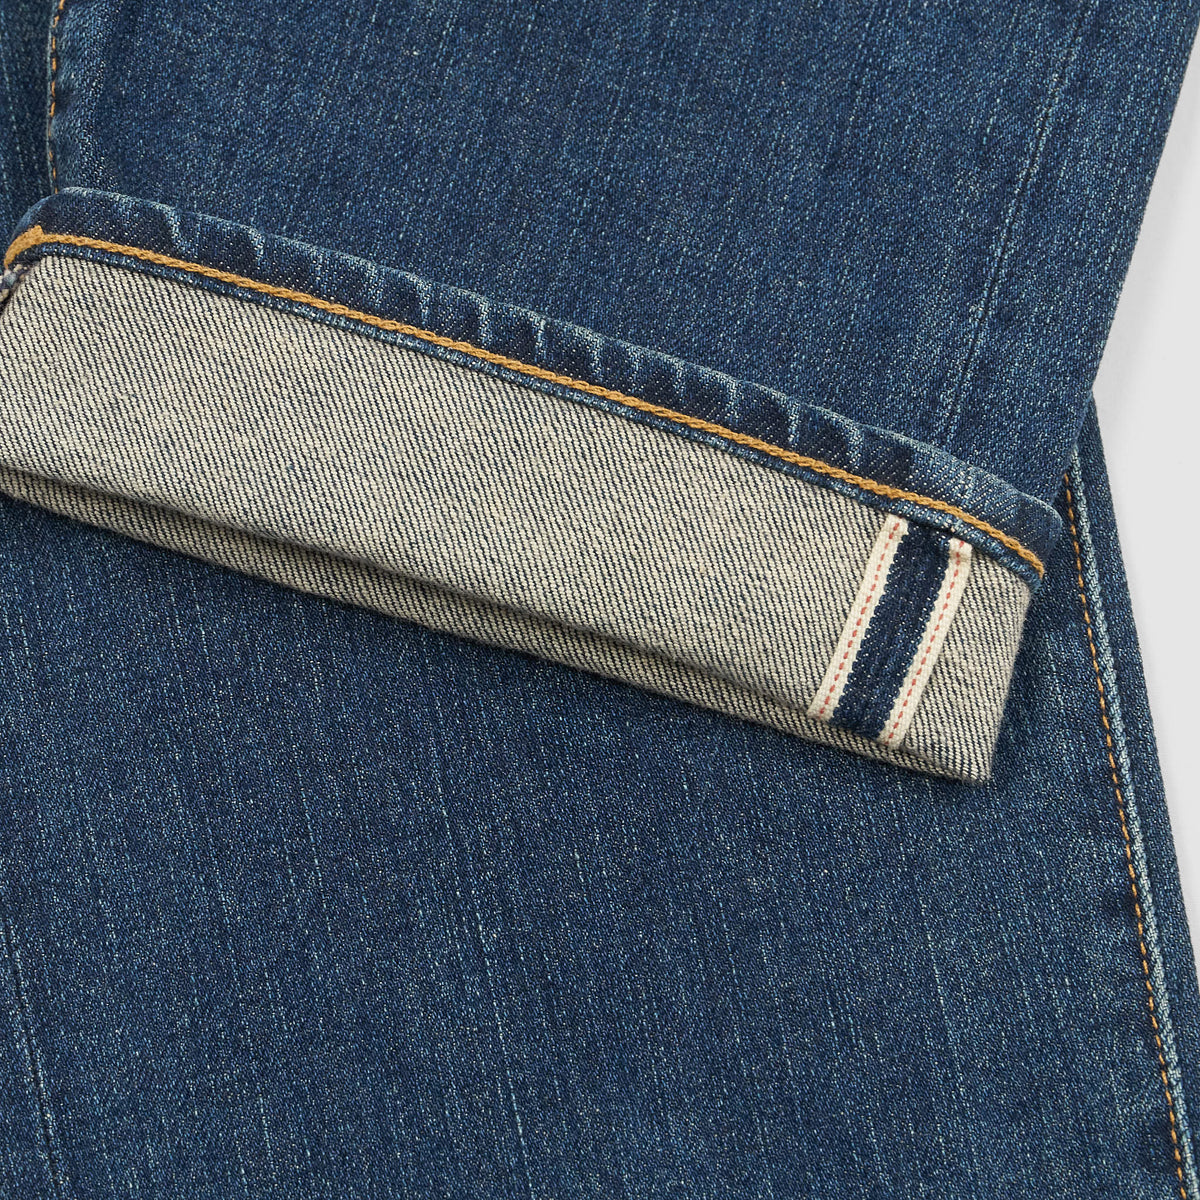 Hiroshi Kato The Pen Zip Fly Selvage Denim Classic Fit